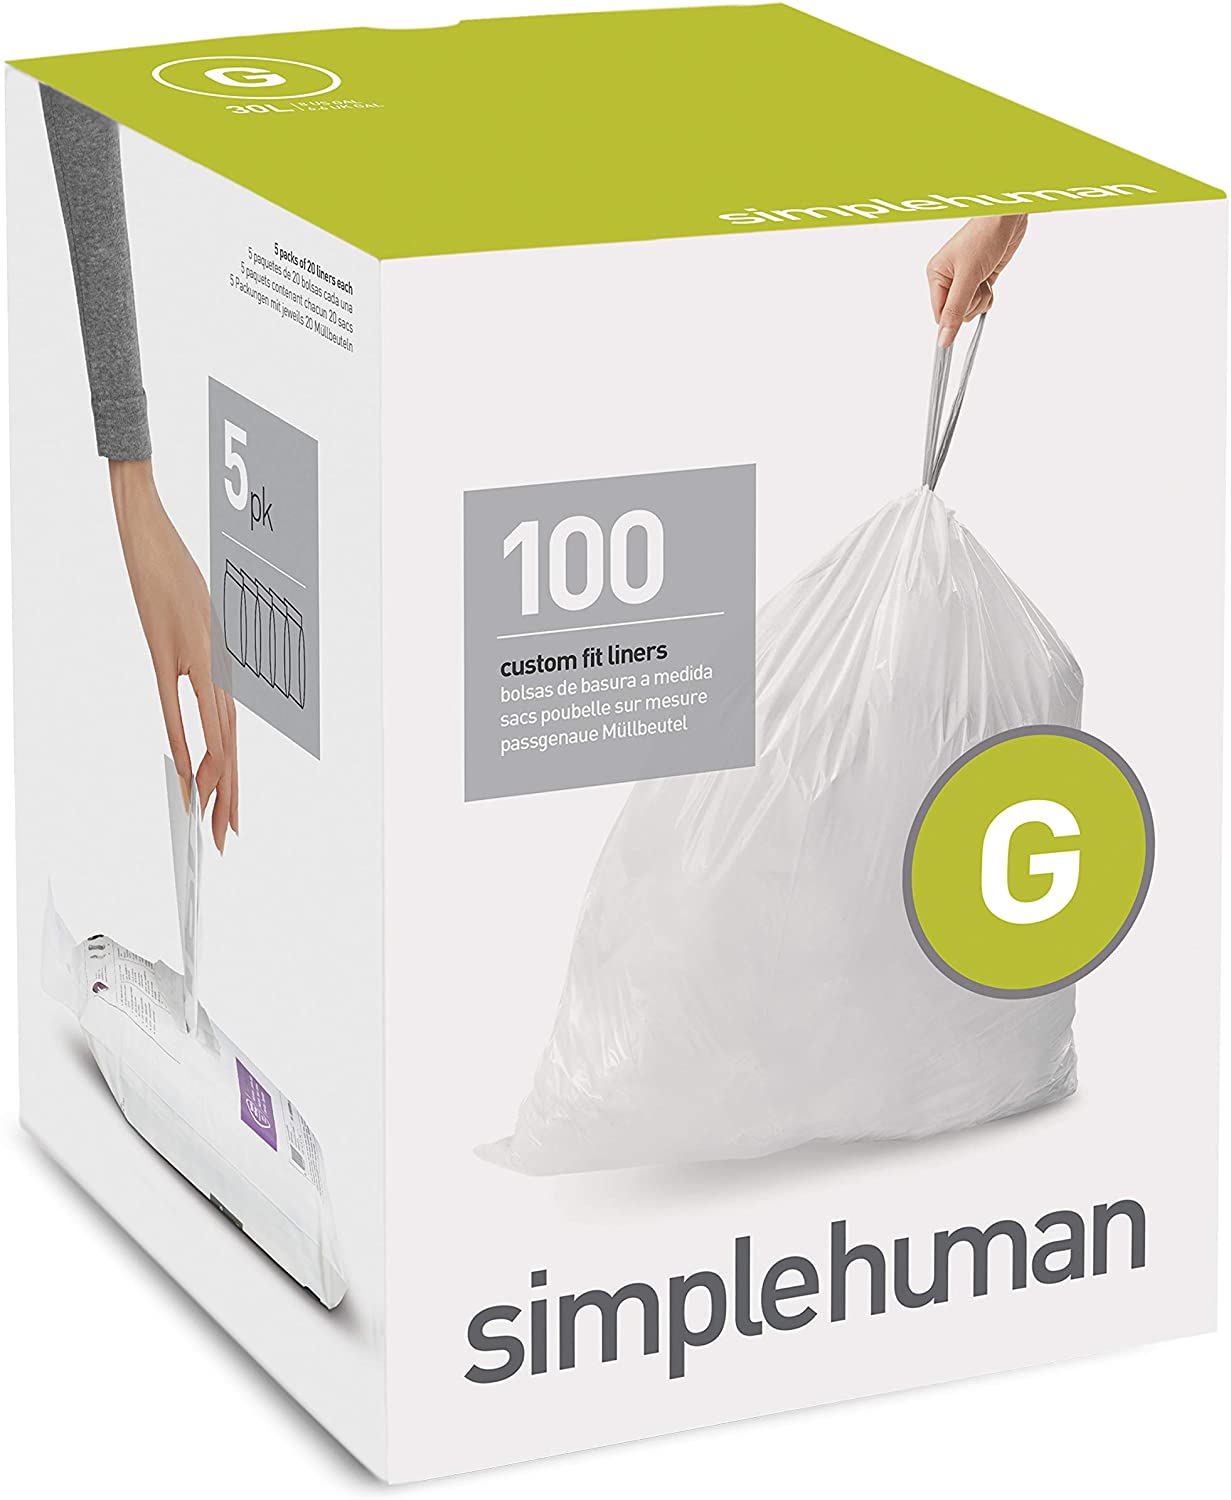 Simplehuman Code G Custom Fit Drawstring Trash Bags 30 Liter / 8 Gallon, White, 100 Count, Liners Easy-Open Packaging